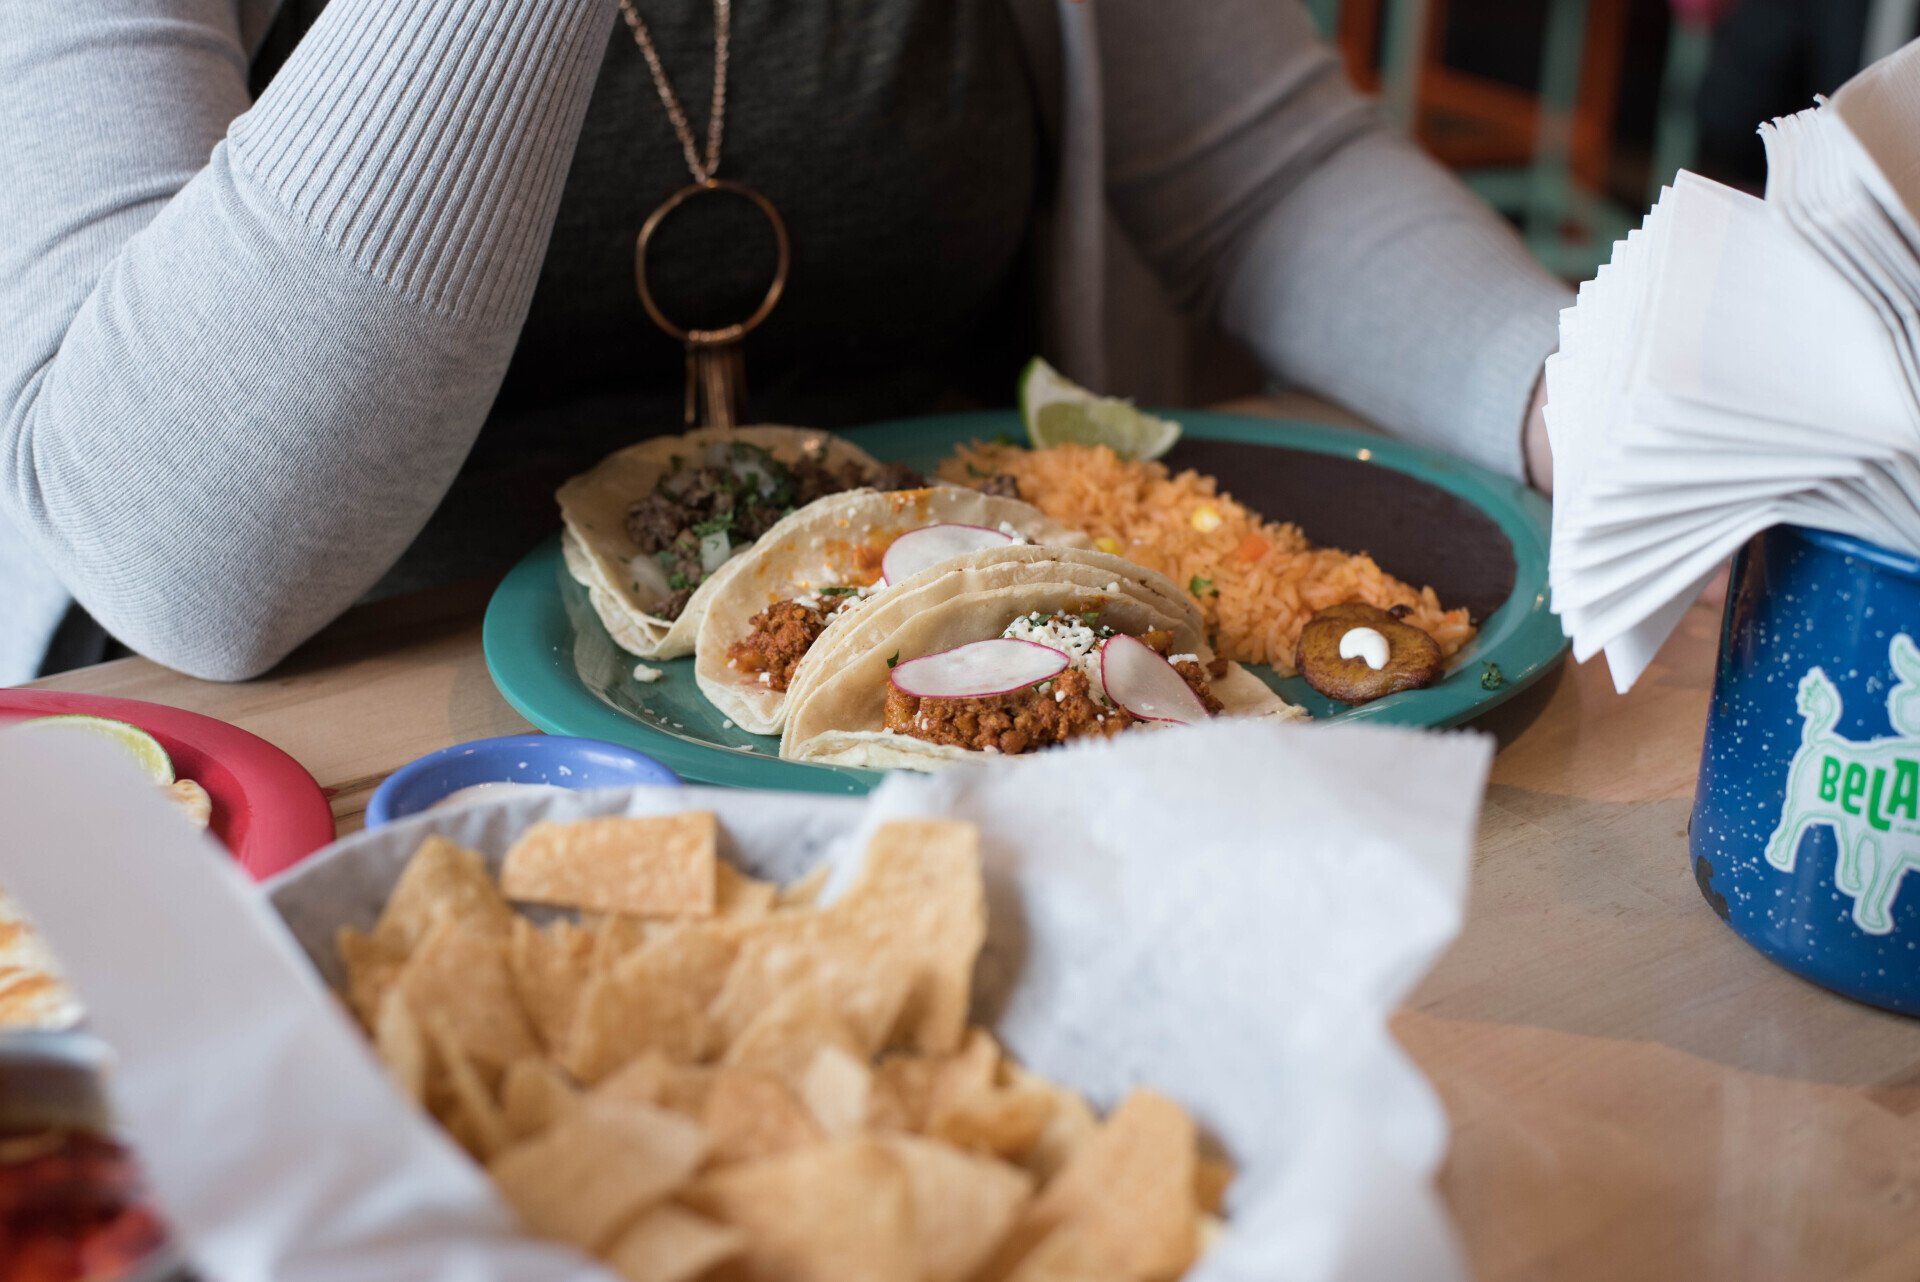 A woman is sitting at a table with a plate of tacos and chips.